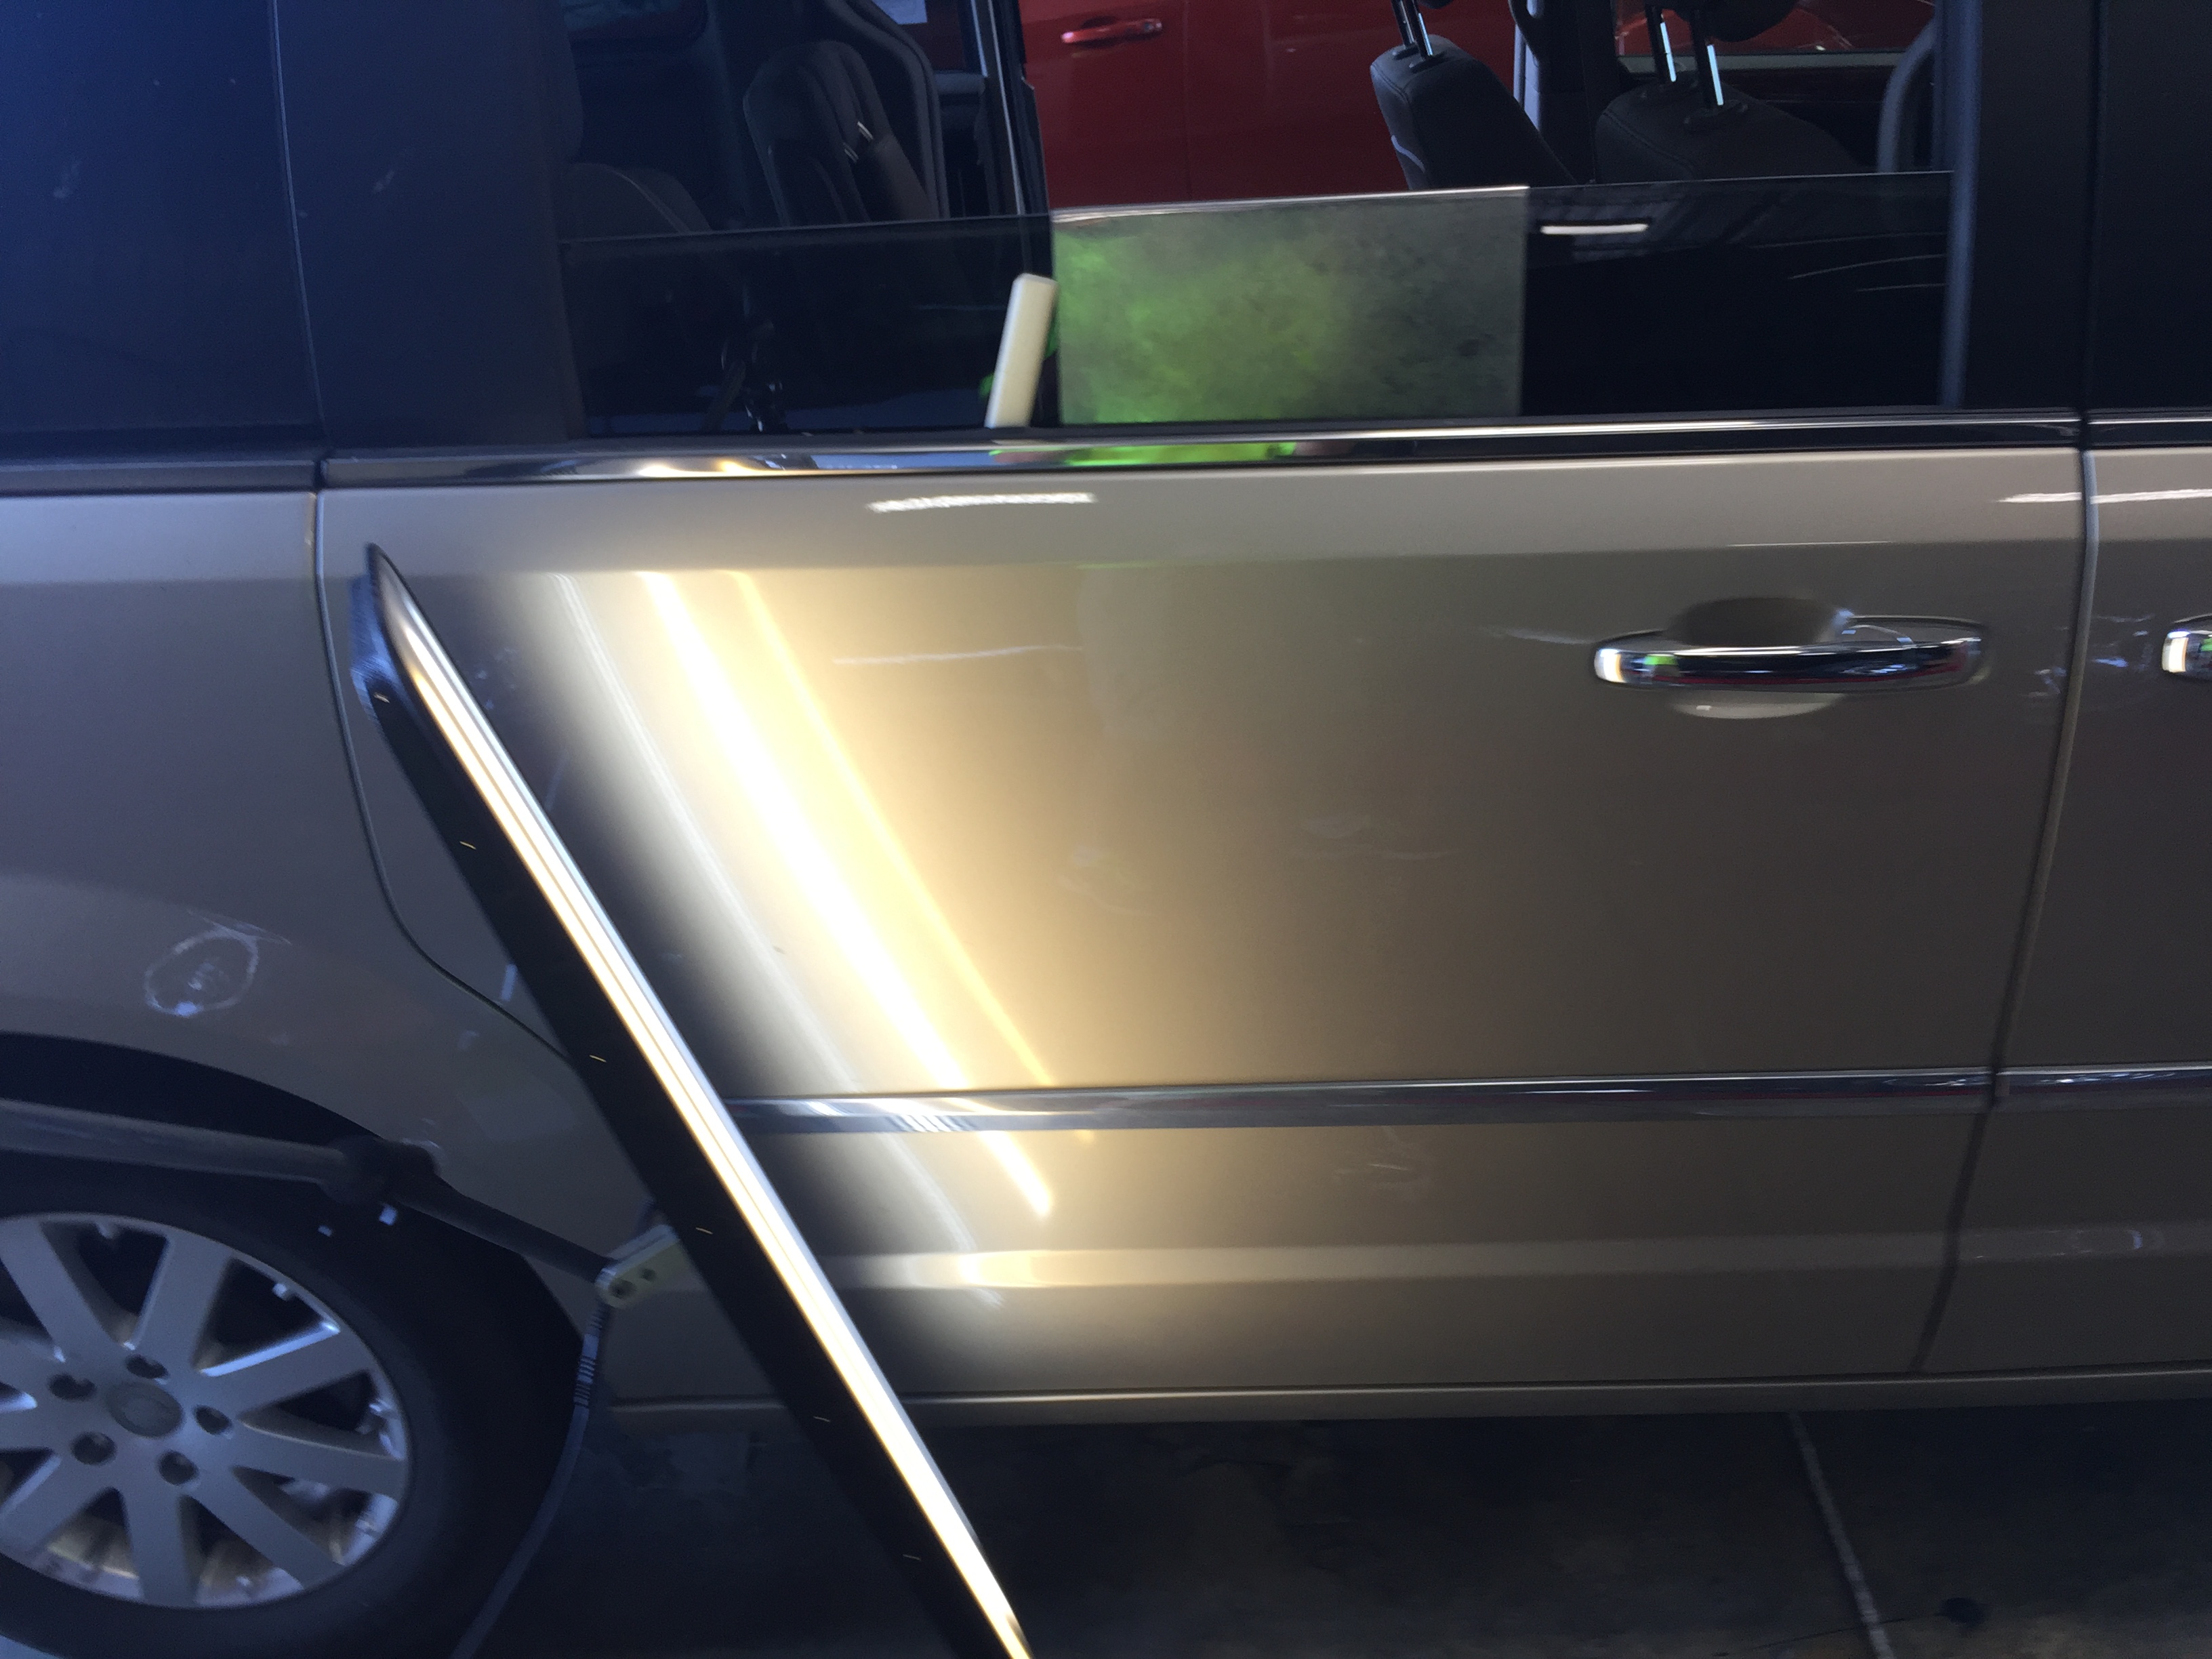 2016 Town & Country Dent Removal, passenger Sliding door, Mobile Dent Repair Springfield, IL http://217dent.com